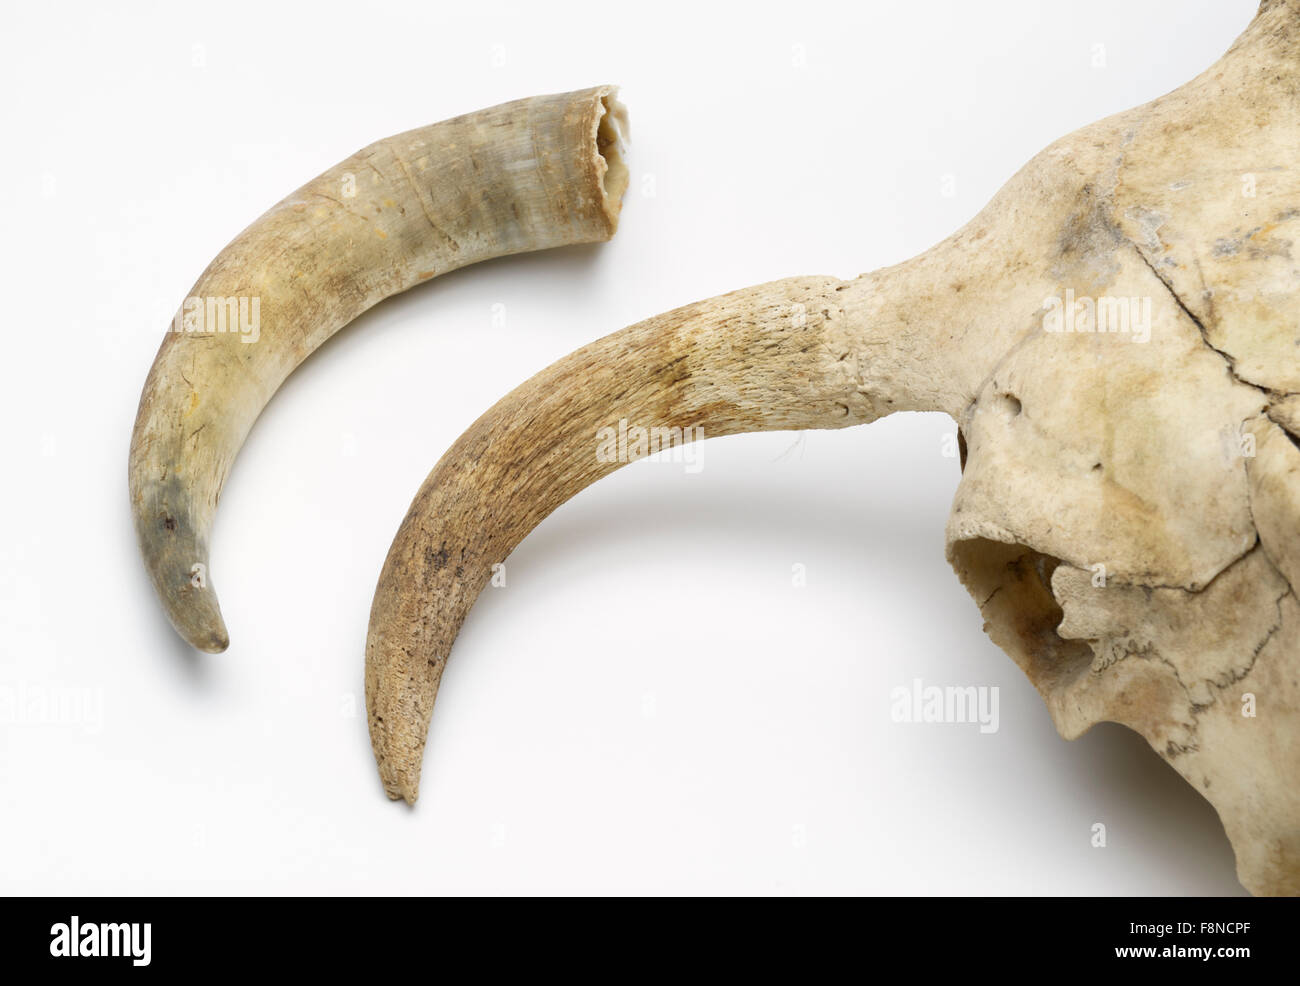 Cattle horn with keratin sheath off of the bone Stock Photo